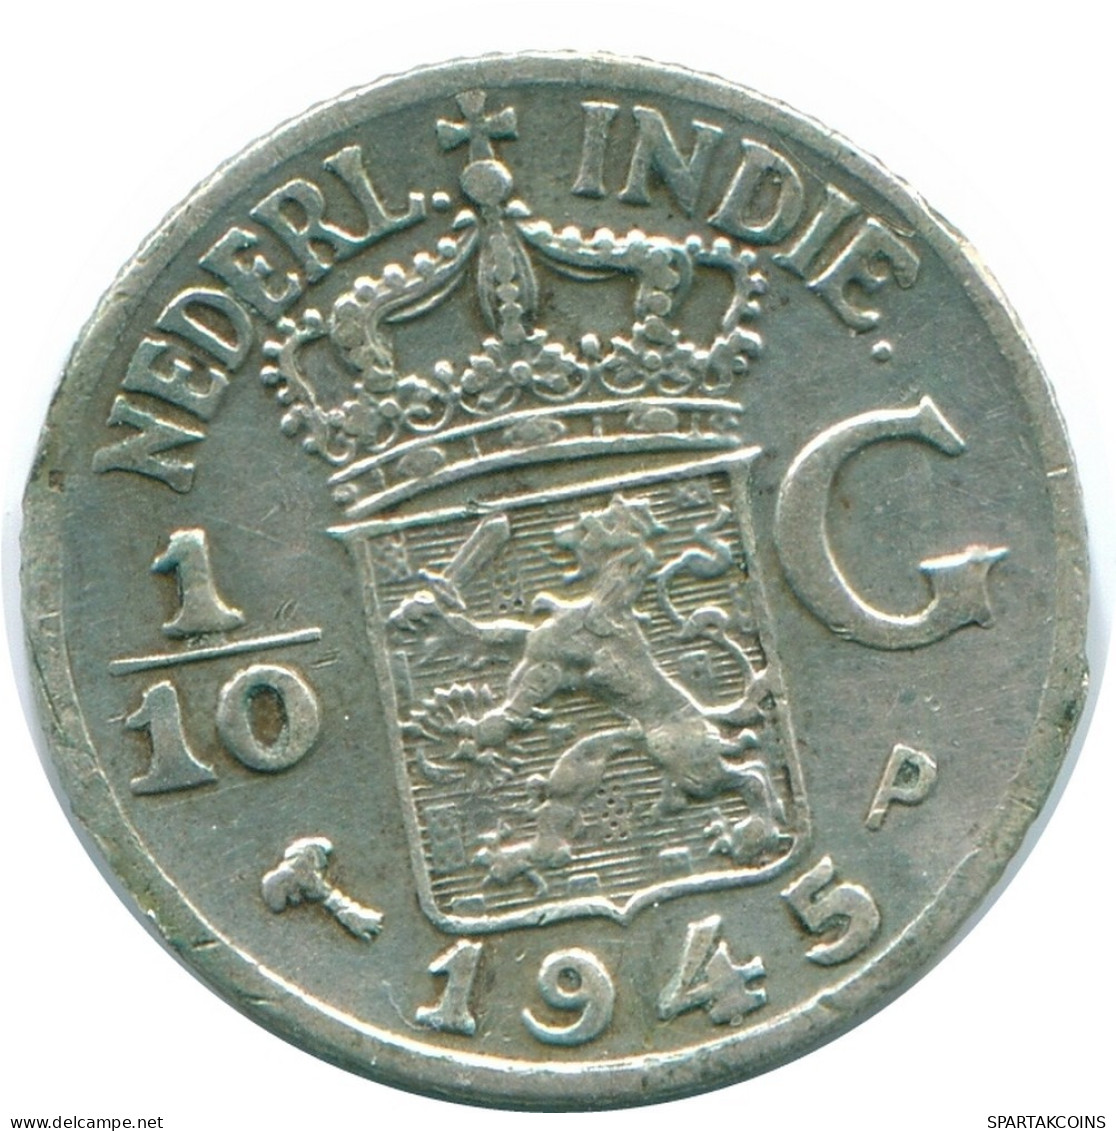 1/10 GULDEN 1945 P NETHERLANDS EAST INDIES SILVER Colonial Coin #NL14115.3.U.A - Indes Neerlandesas